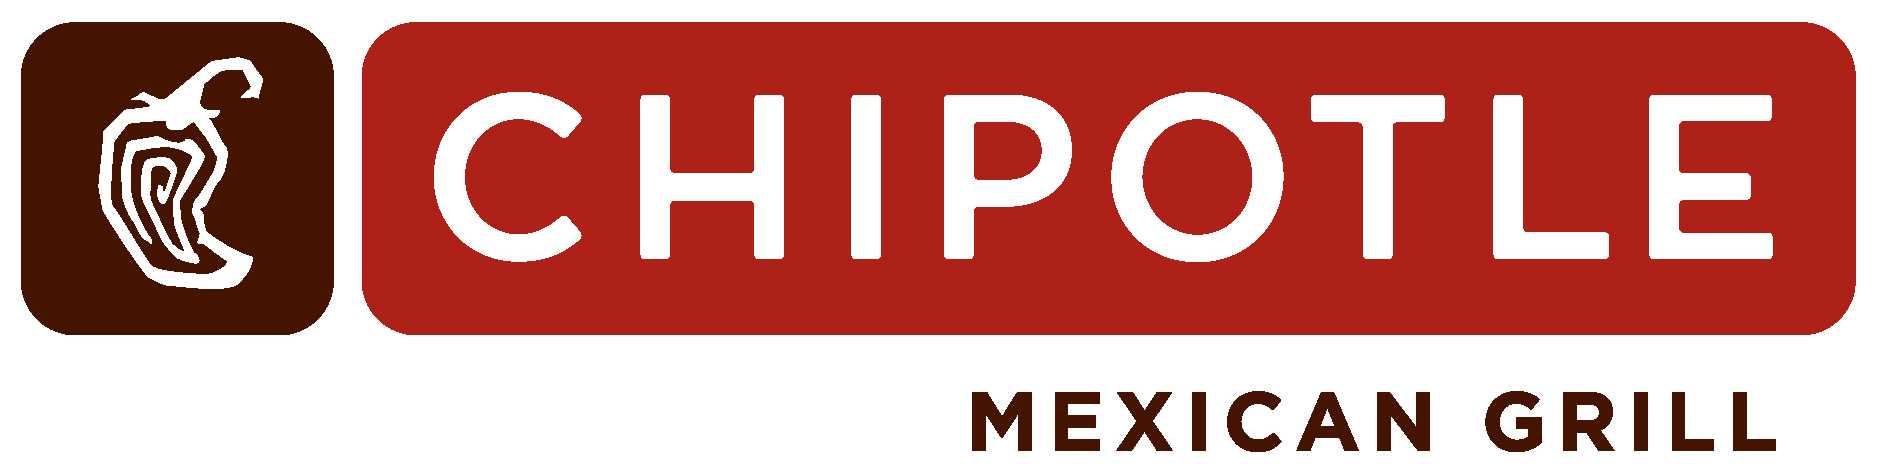 Chipotle Holiday Hours